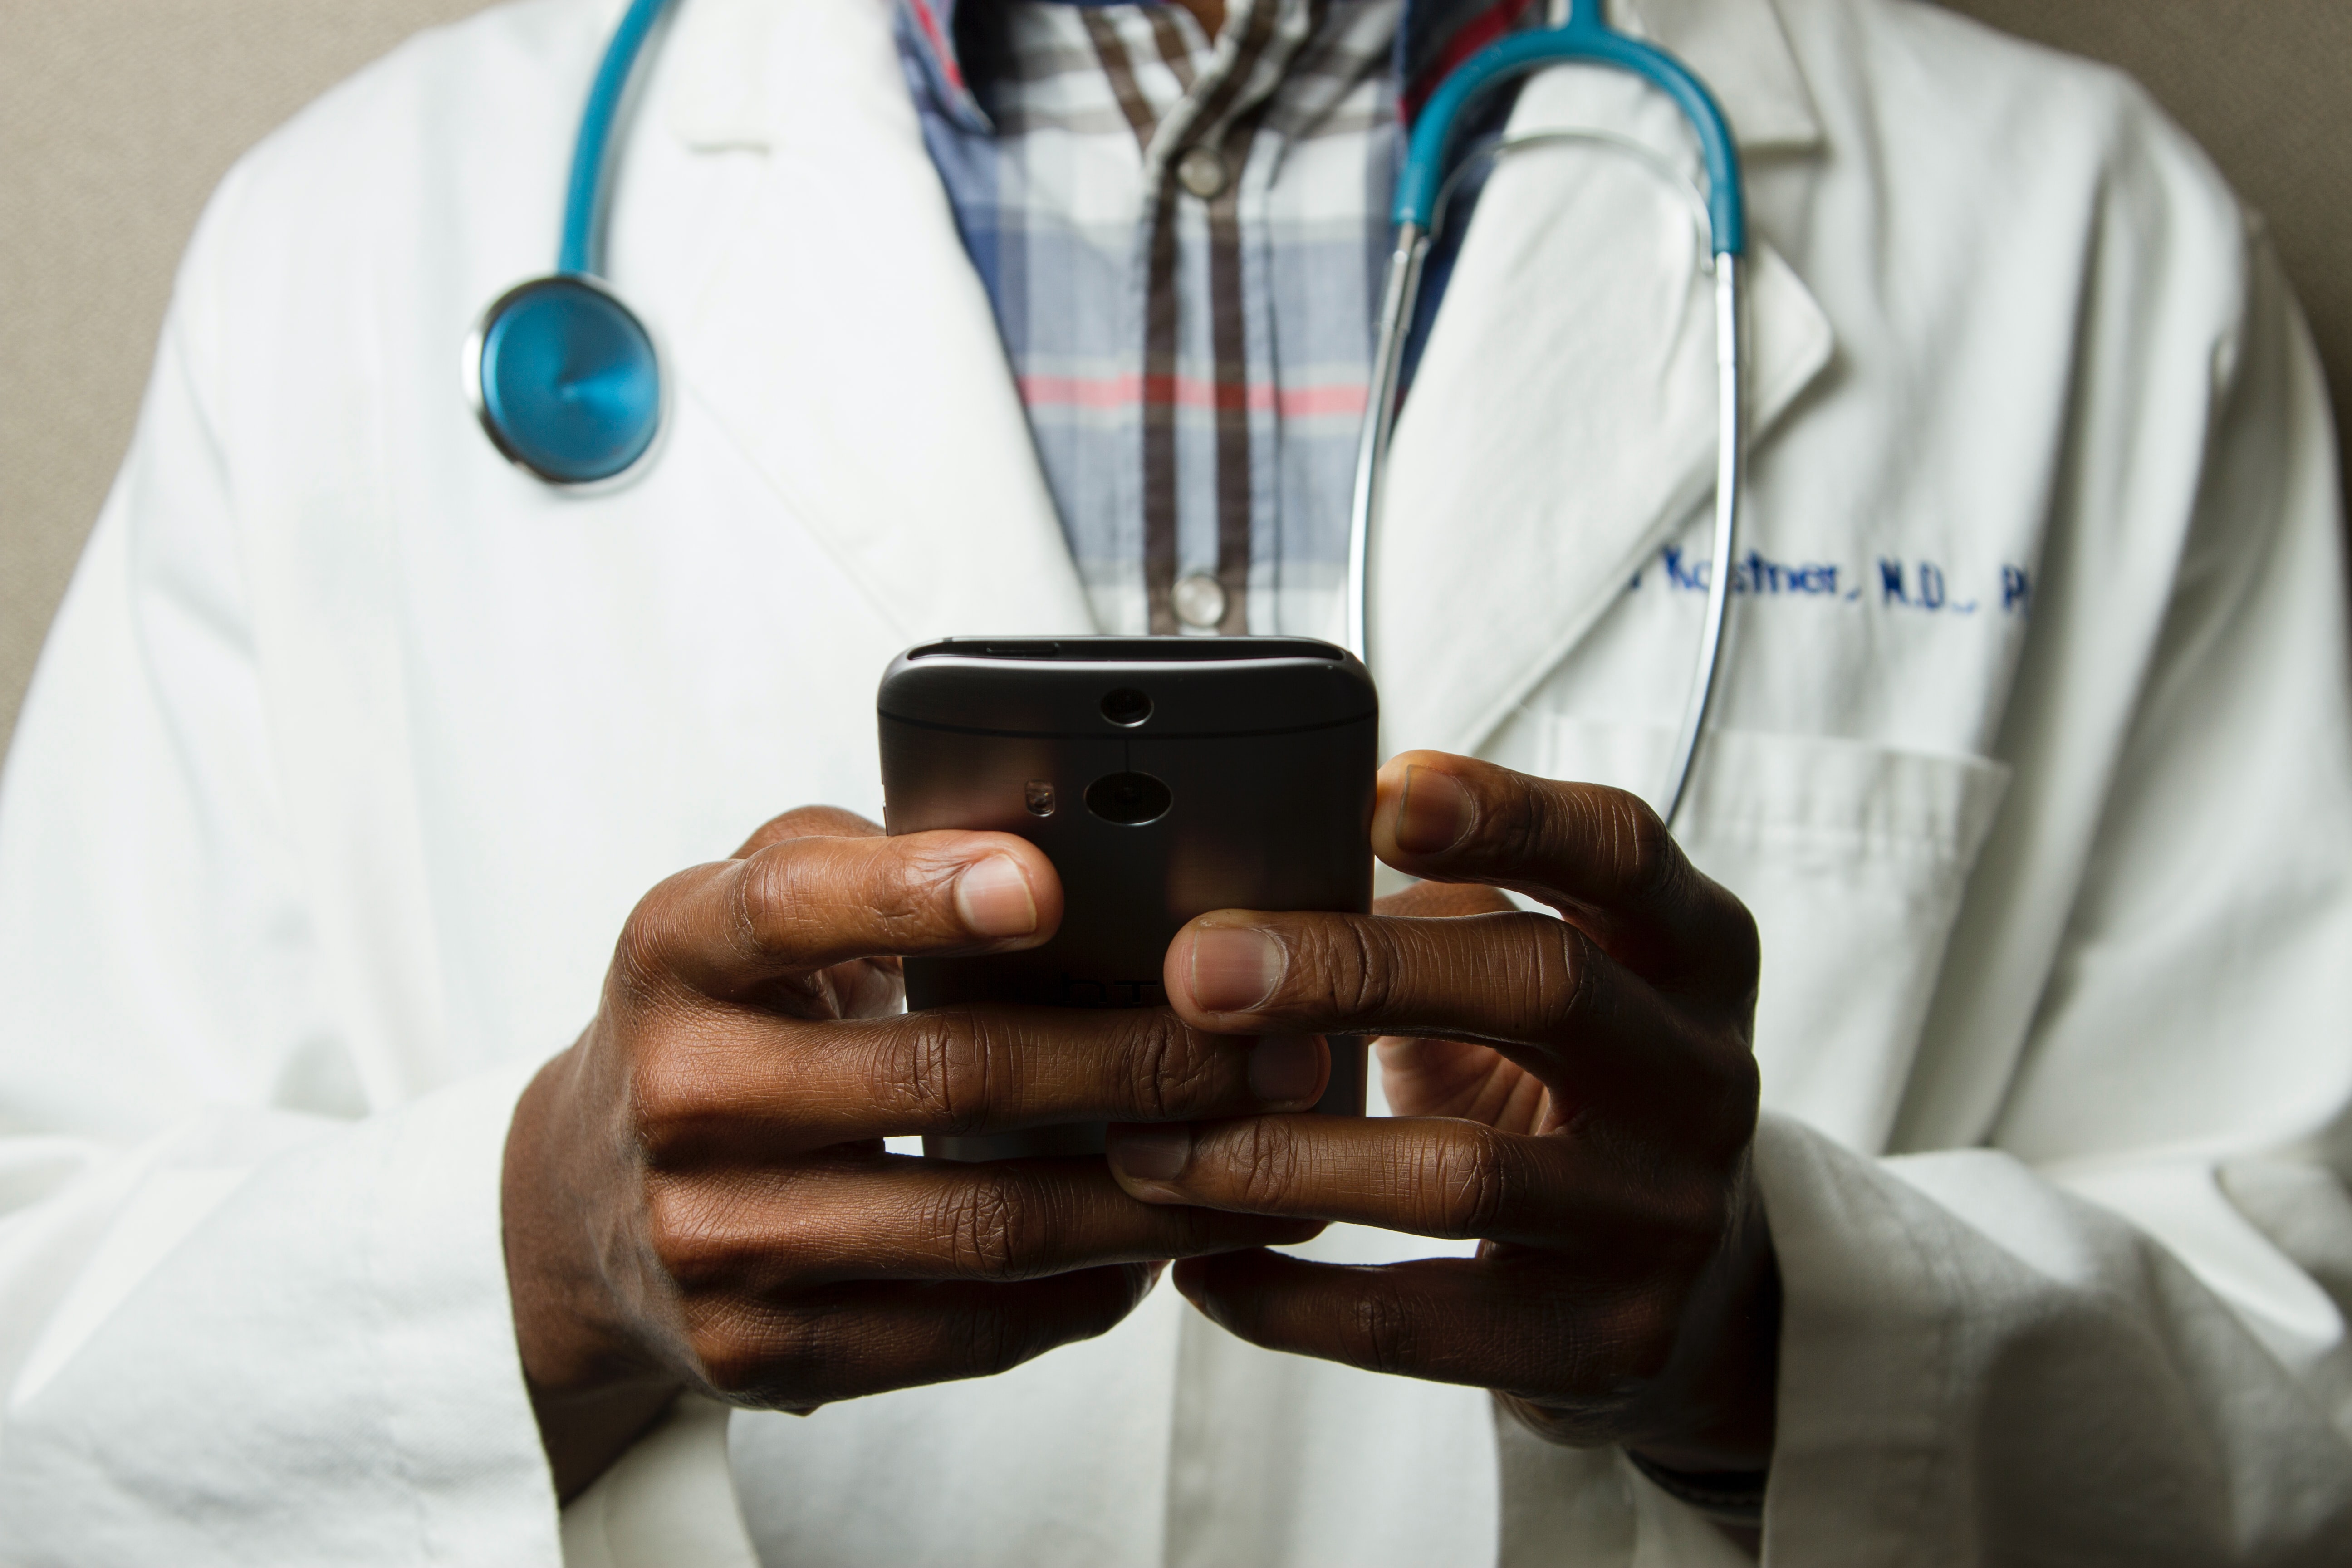 A physician looks at his phone